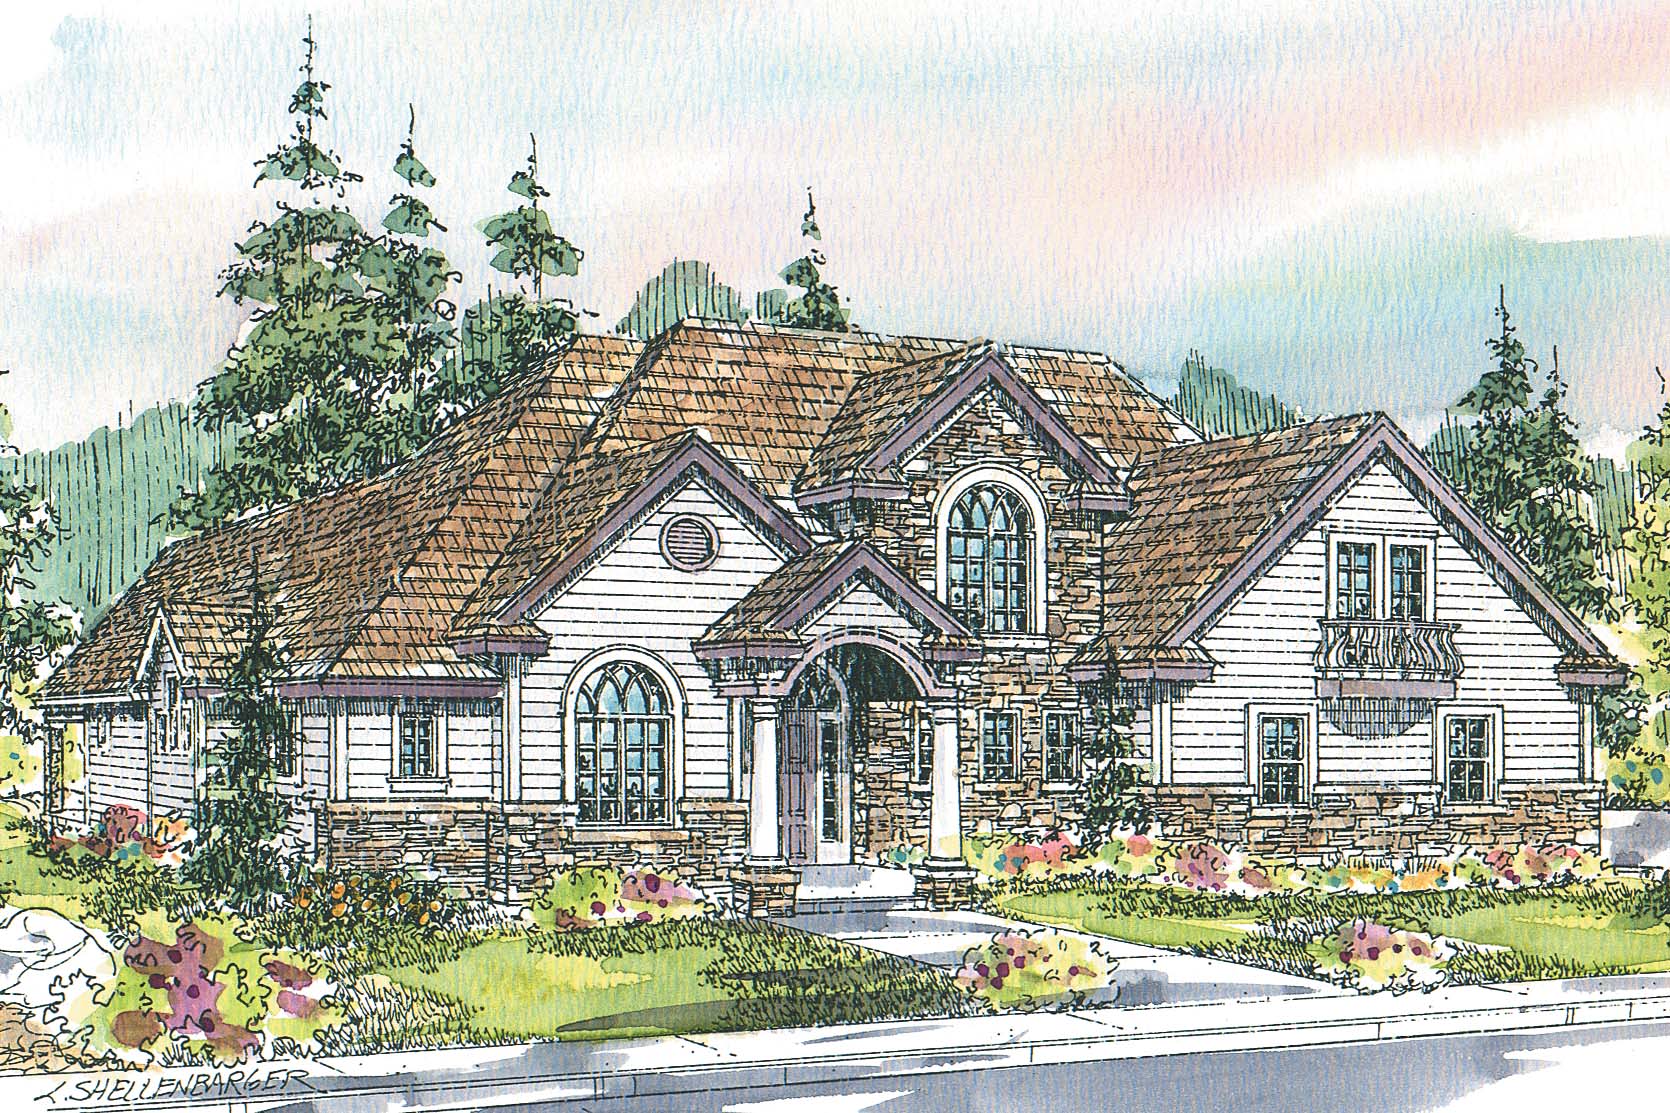 European House Plan, Home Plan, Featured House Plan of the Week, Southwick 30-482